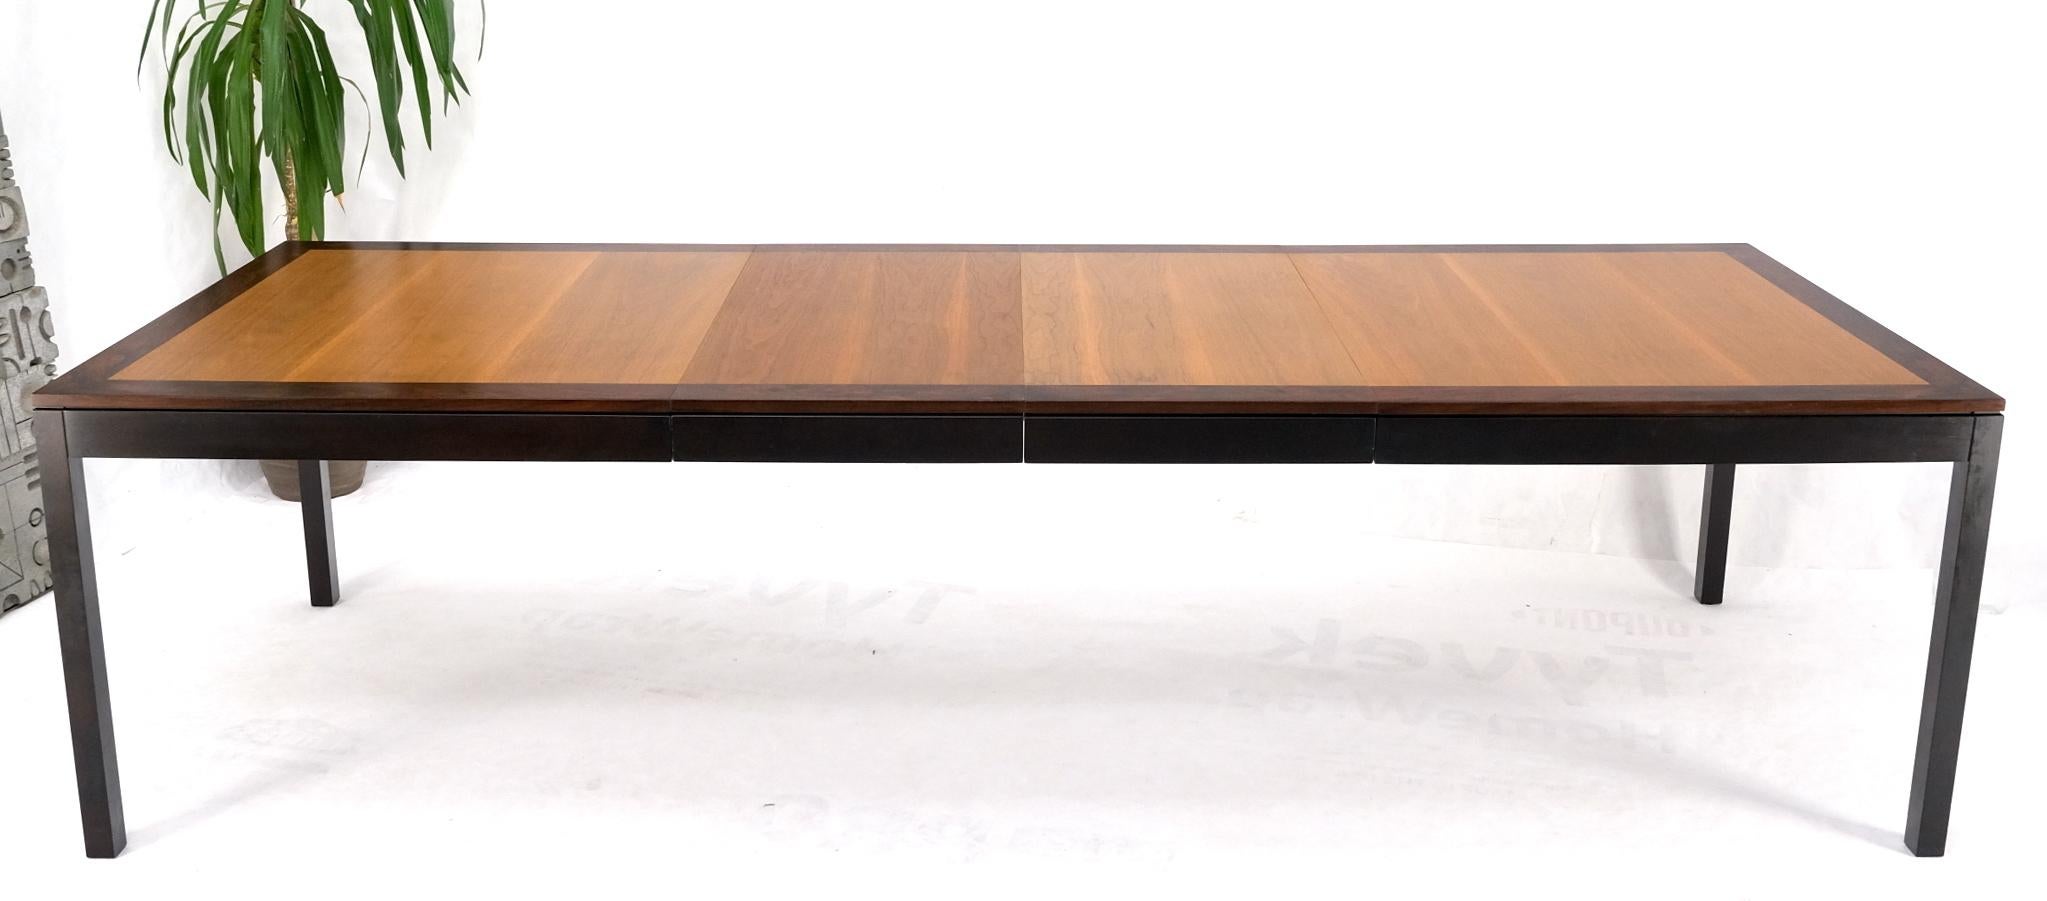 Banded Rosewood & Walnut Rectangle Dining Table w/ Two 20